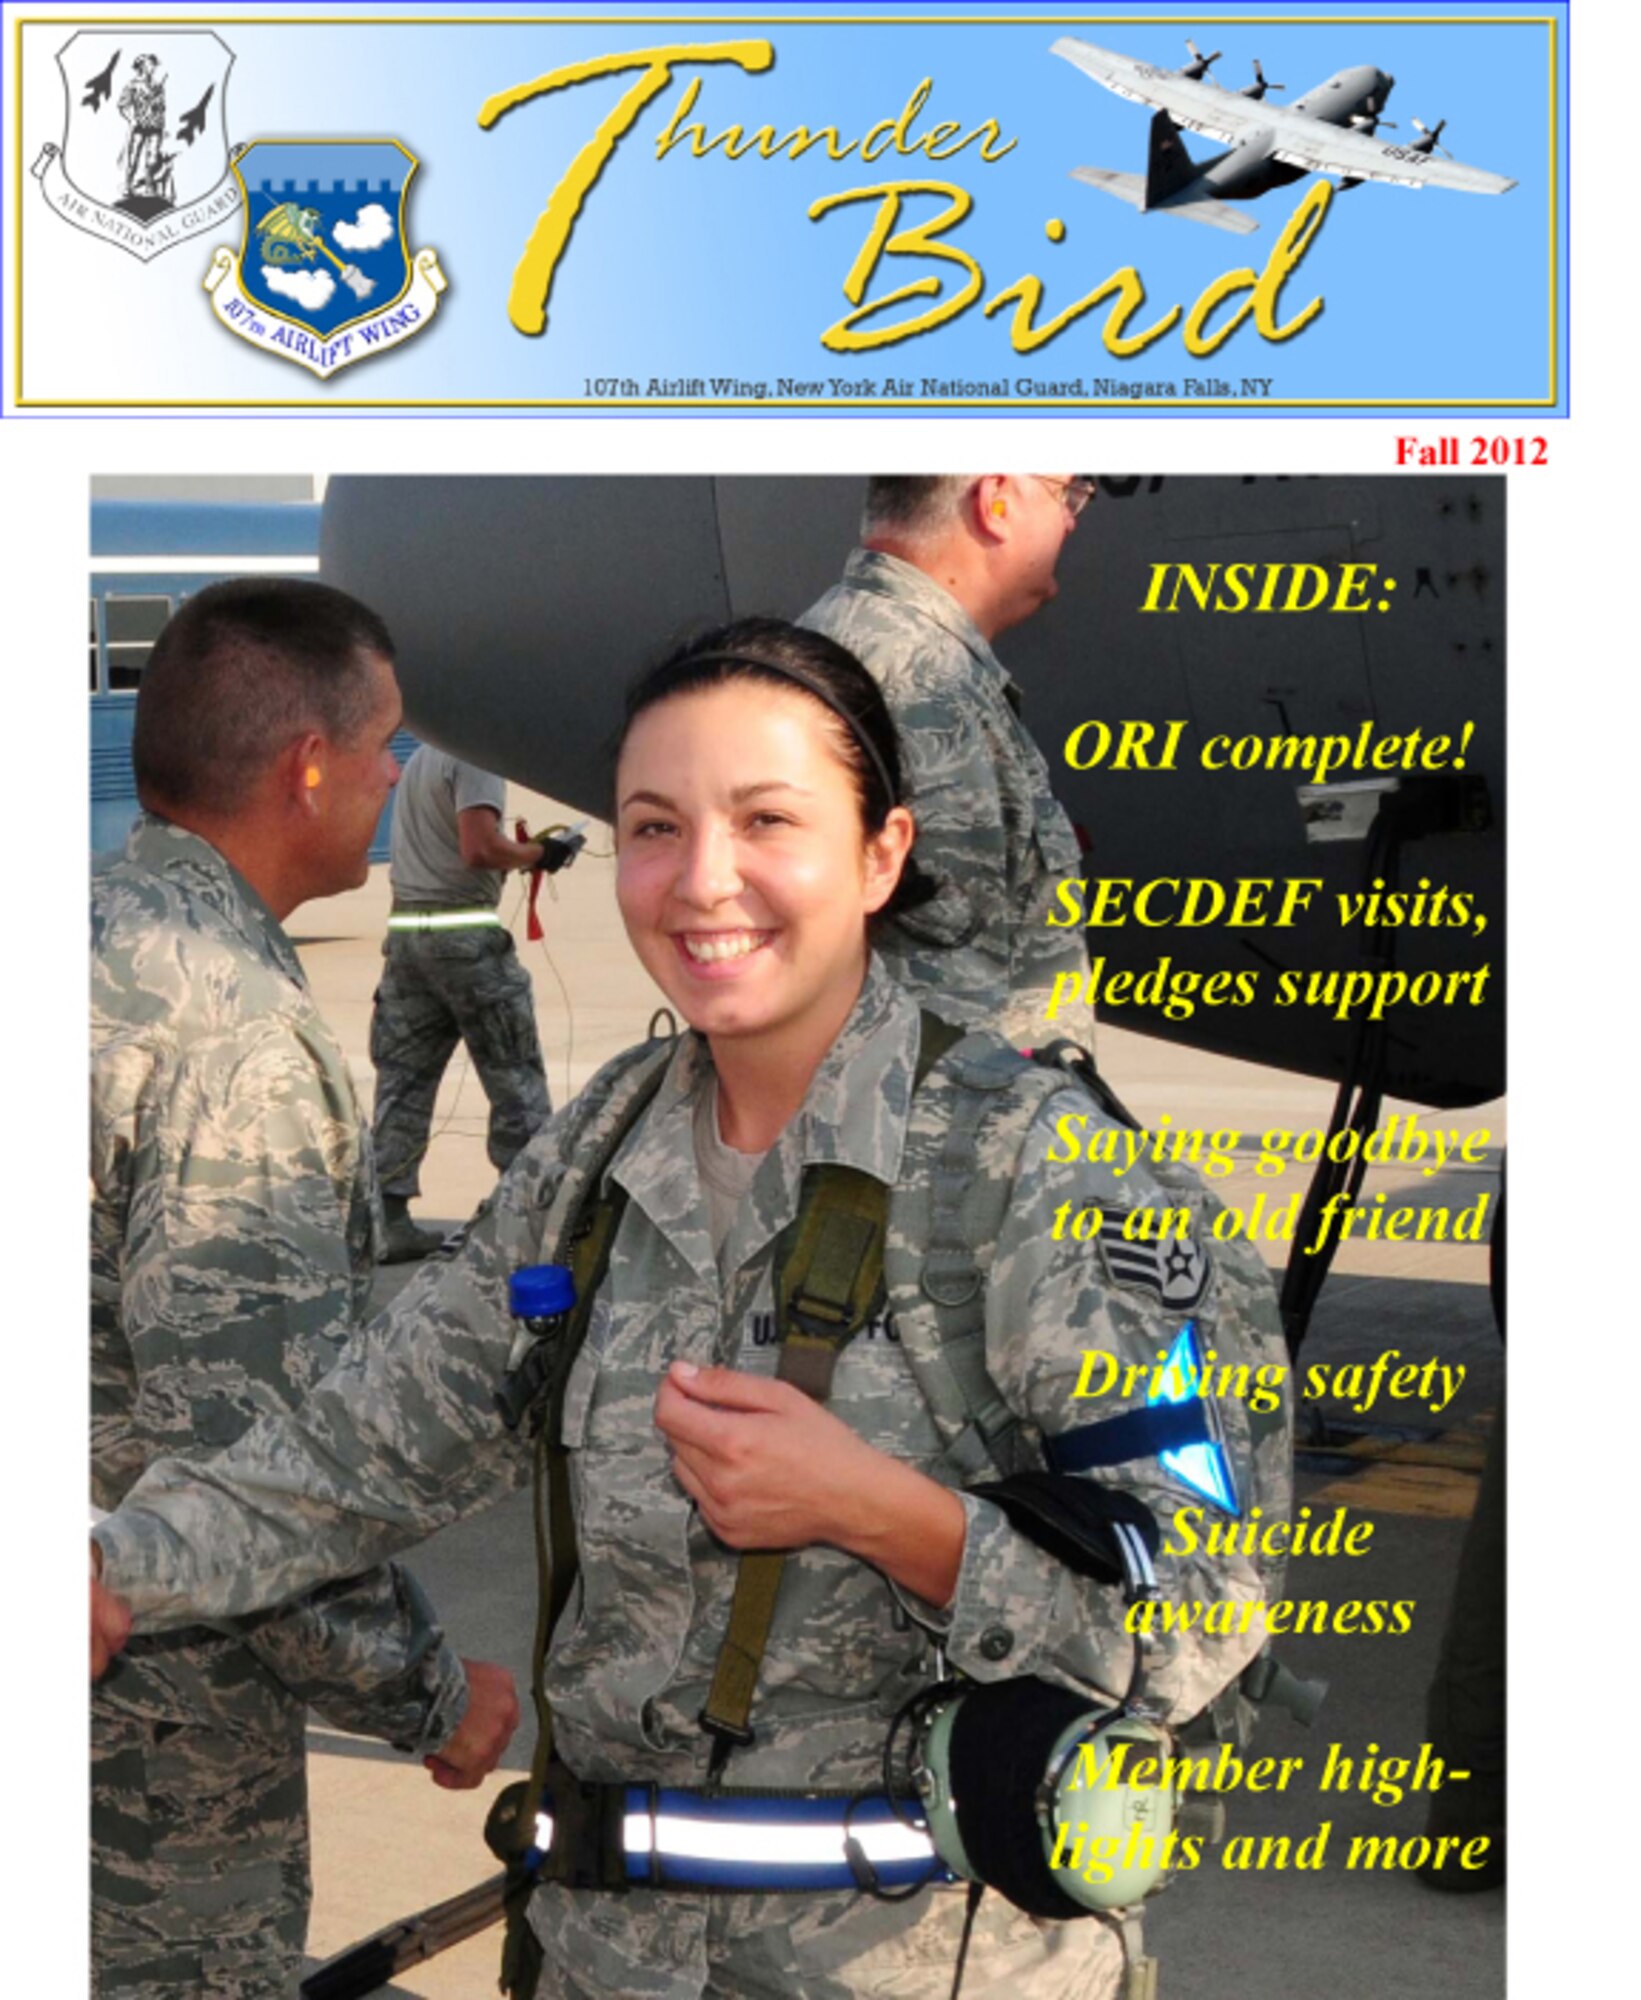 The ThunderBird has changed to a quarterly edition. It will be published in March, June, September, and December (spring, summer, fall and winter issues). This will take some advanced planning to get articles, columns, and wing events published in the quarterly newsletter.We value your opinions (Air Force Graphic/SMSgt Ray Lloyd) 

